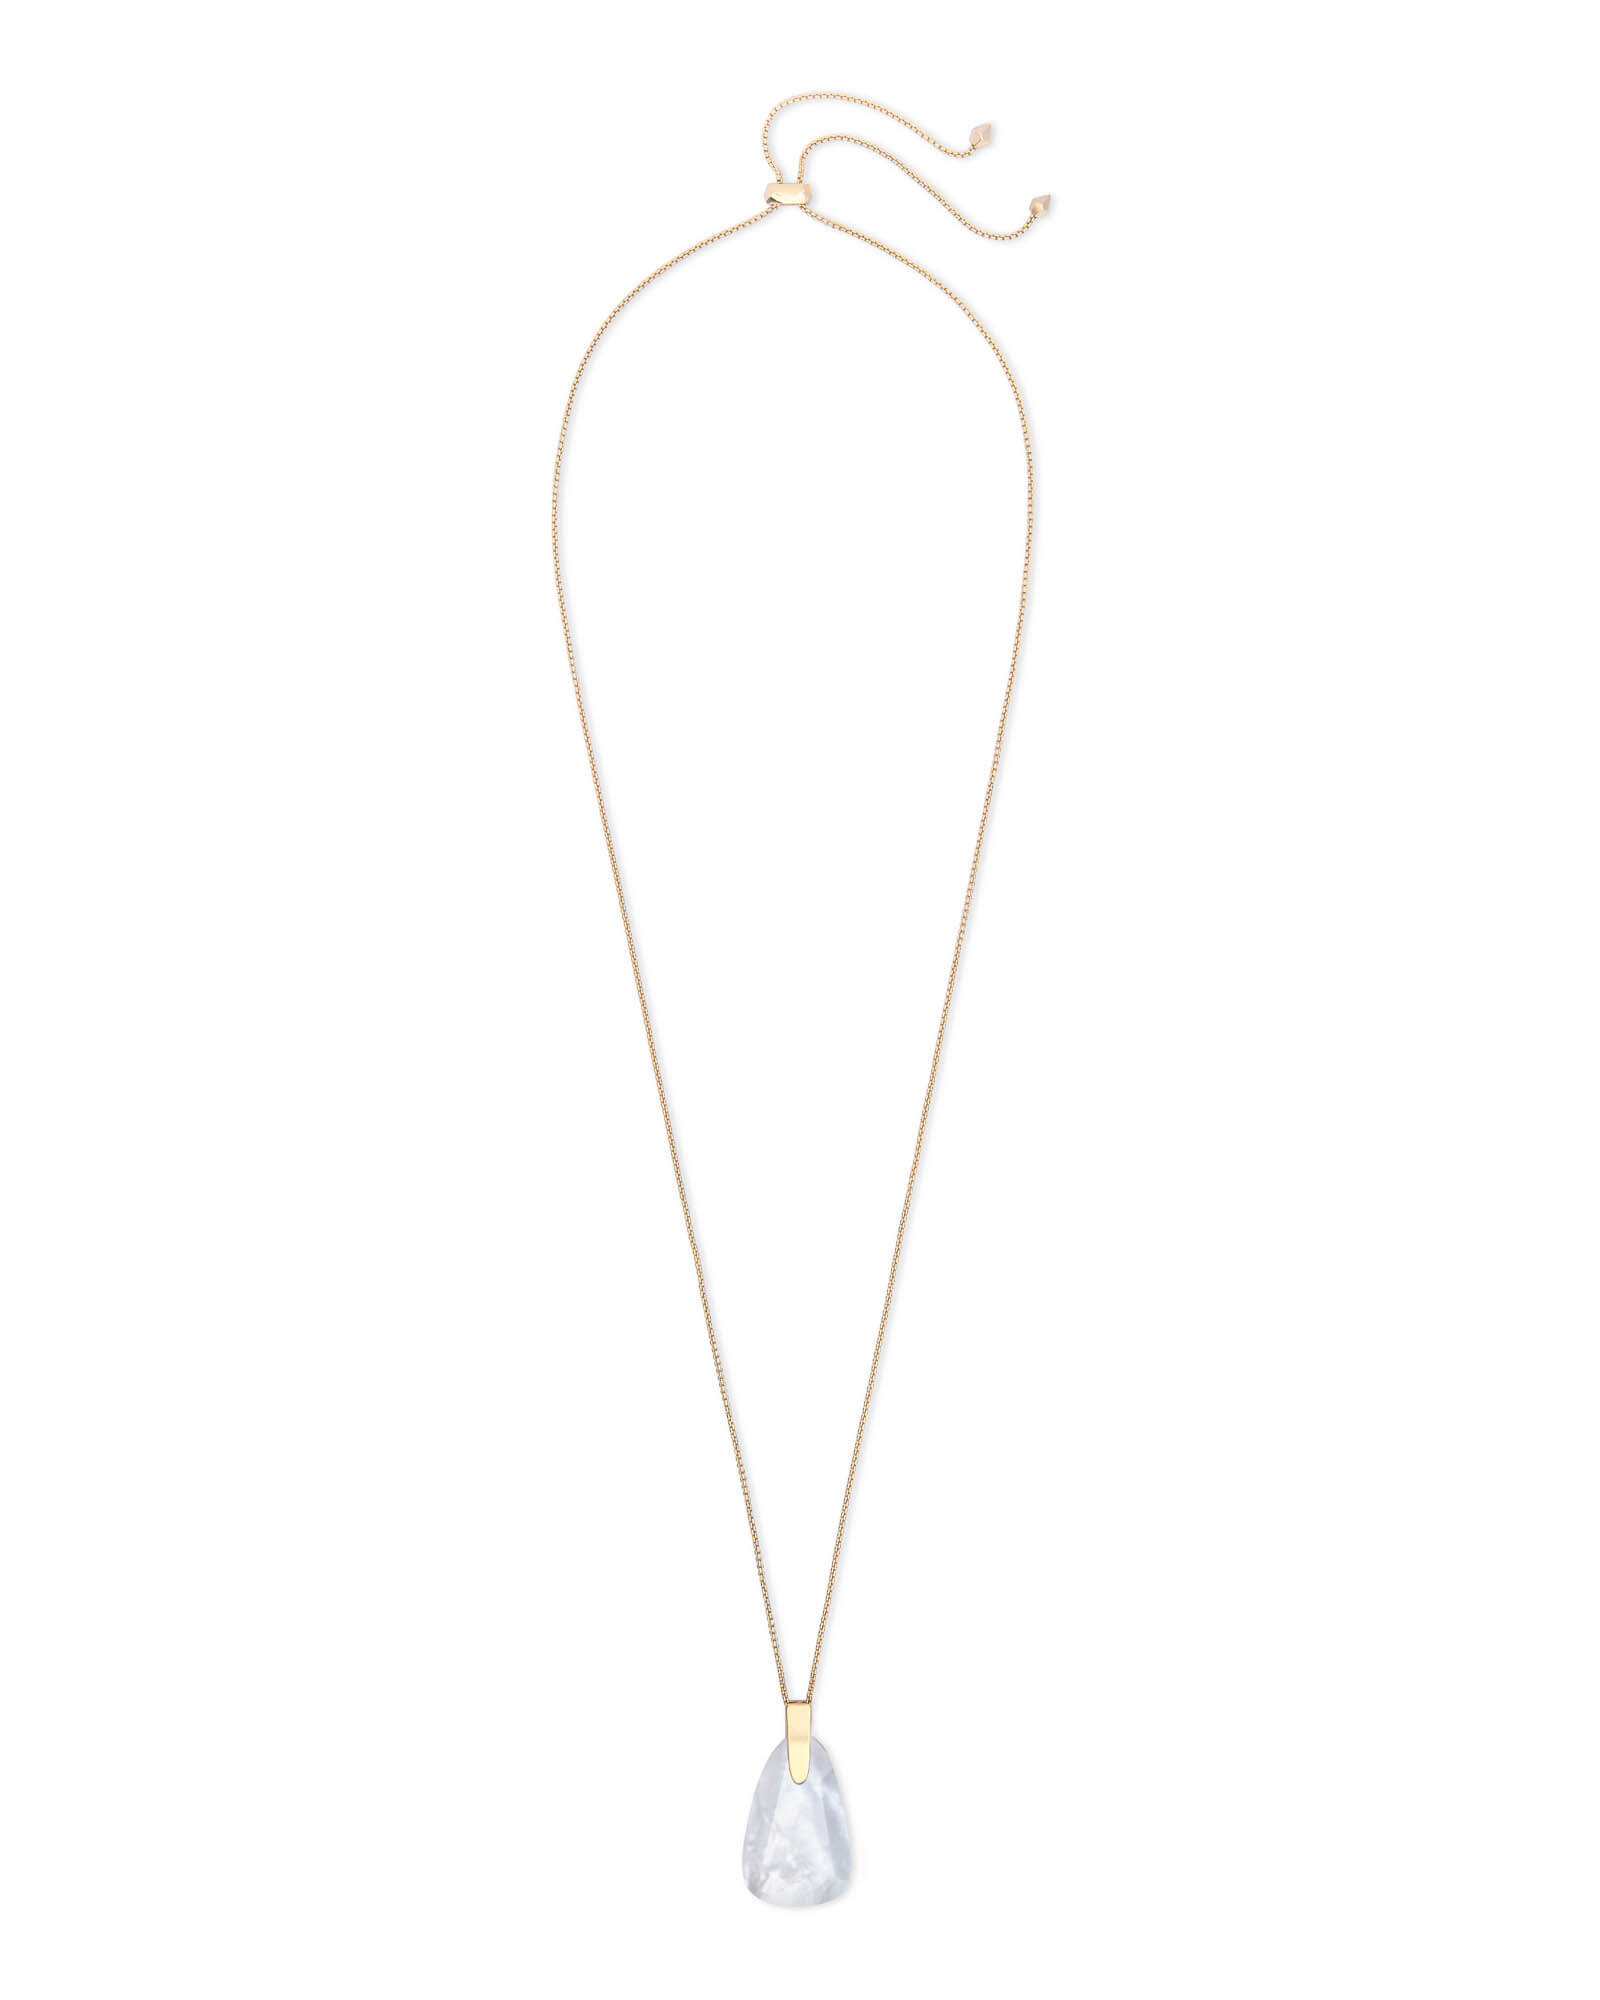 Maeve Gold Long Pendant Necklace in Ivory Mother-of-Pearl | Kendra Scott